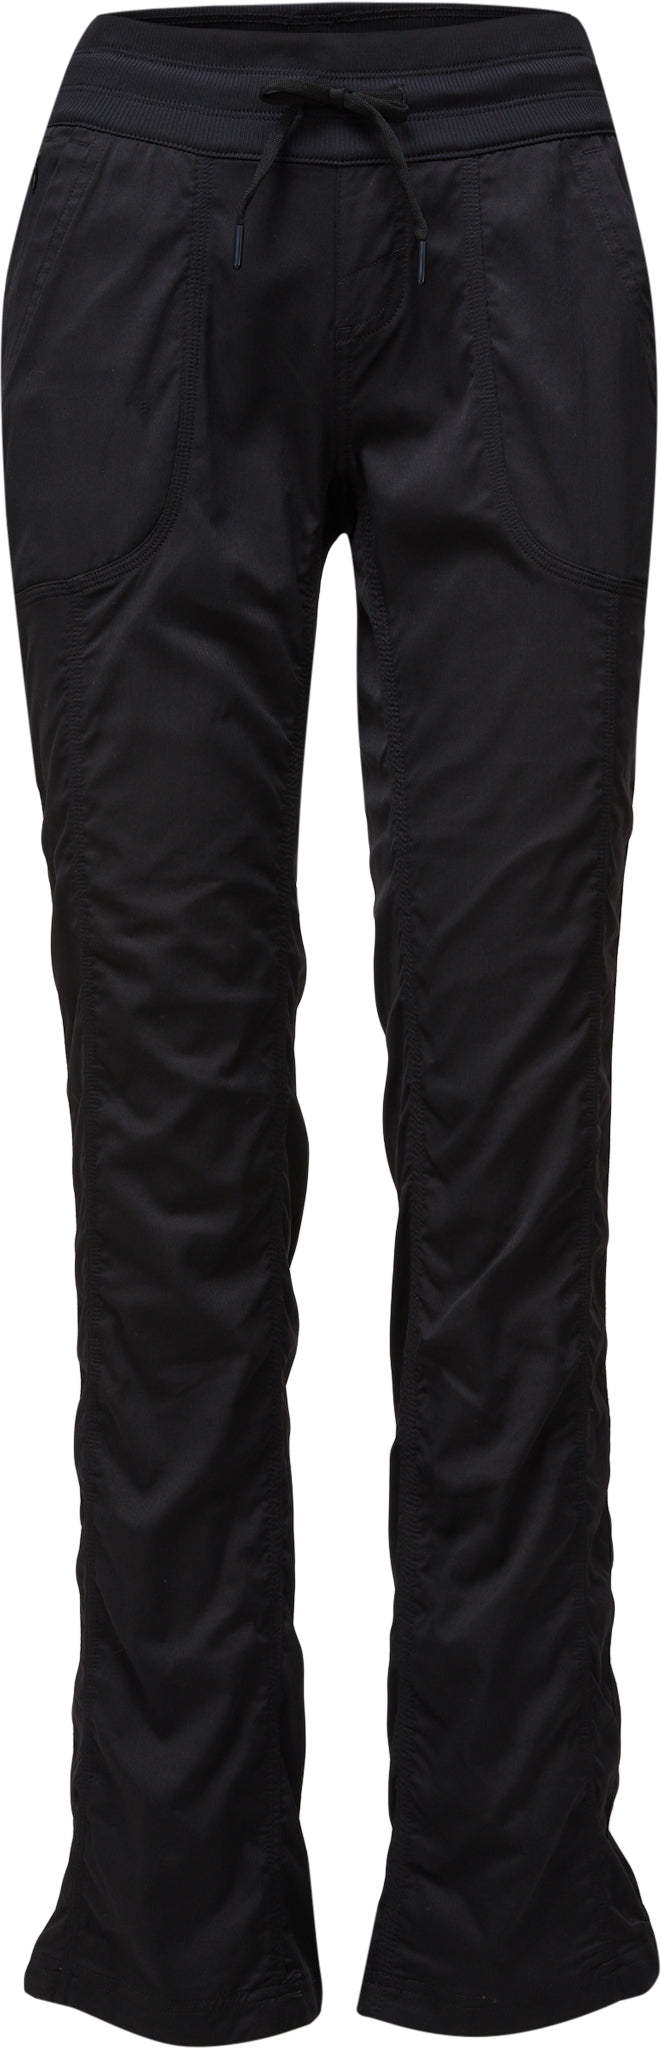 The North Face Womens Winter Warm Essential Legging - Women's outdoor pants